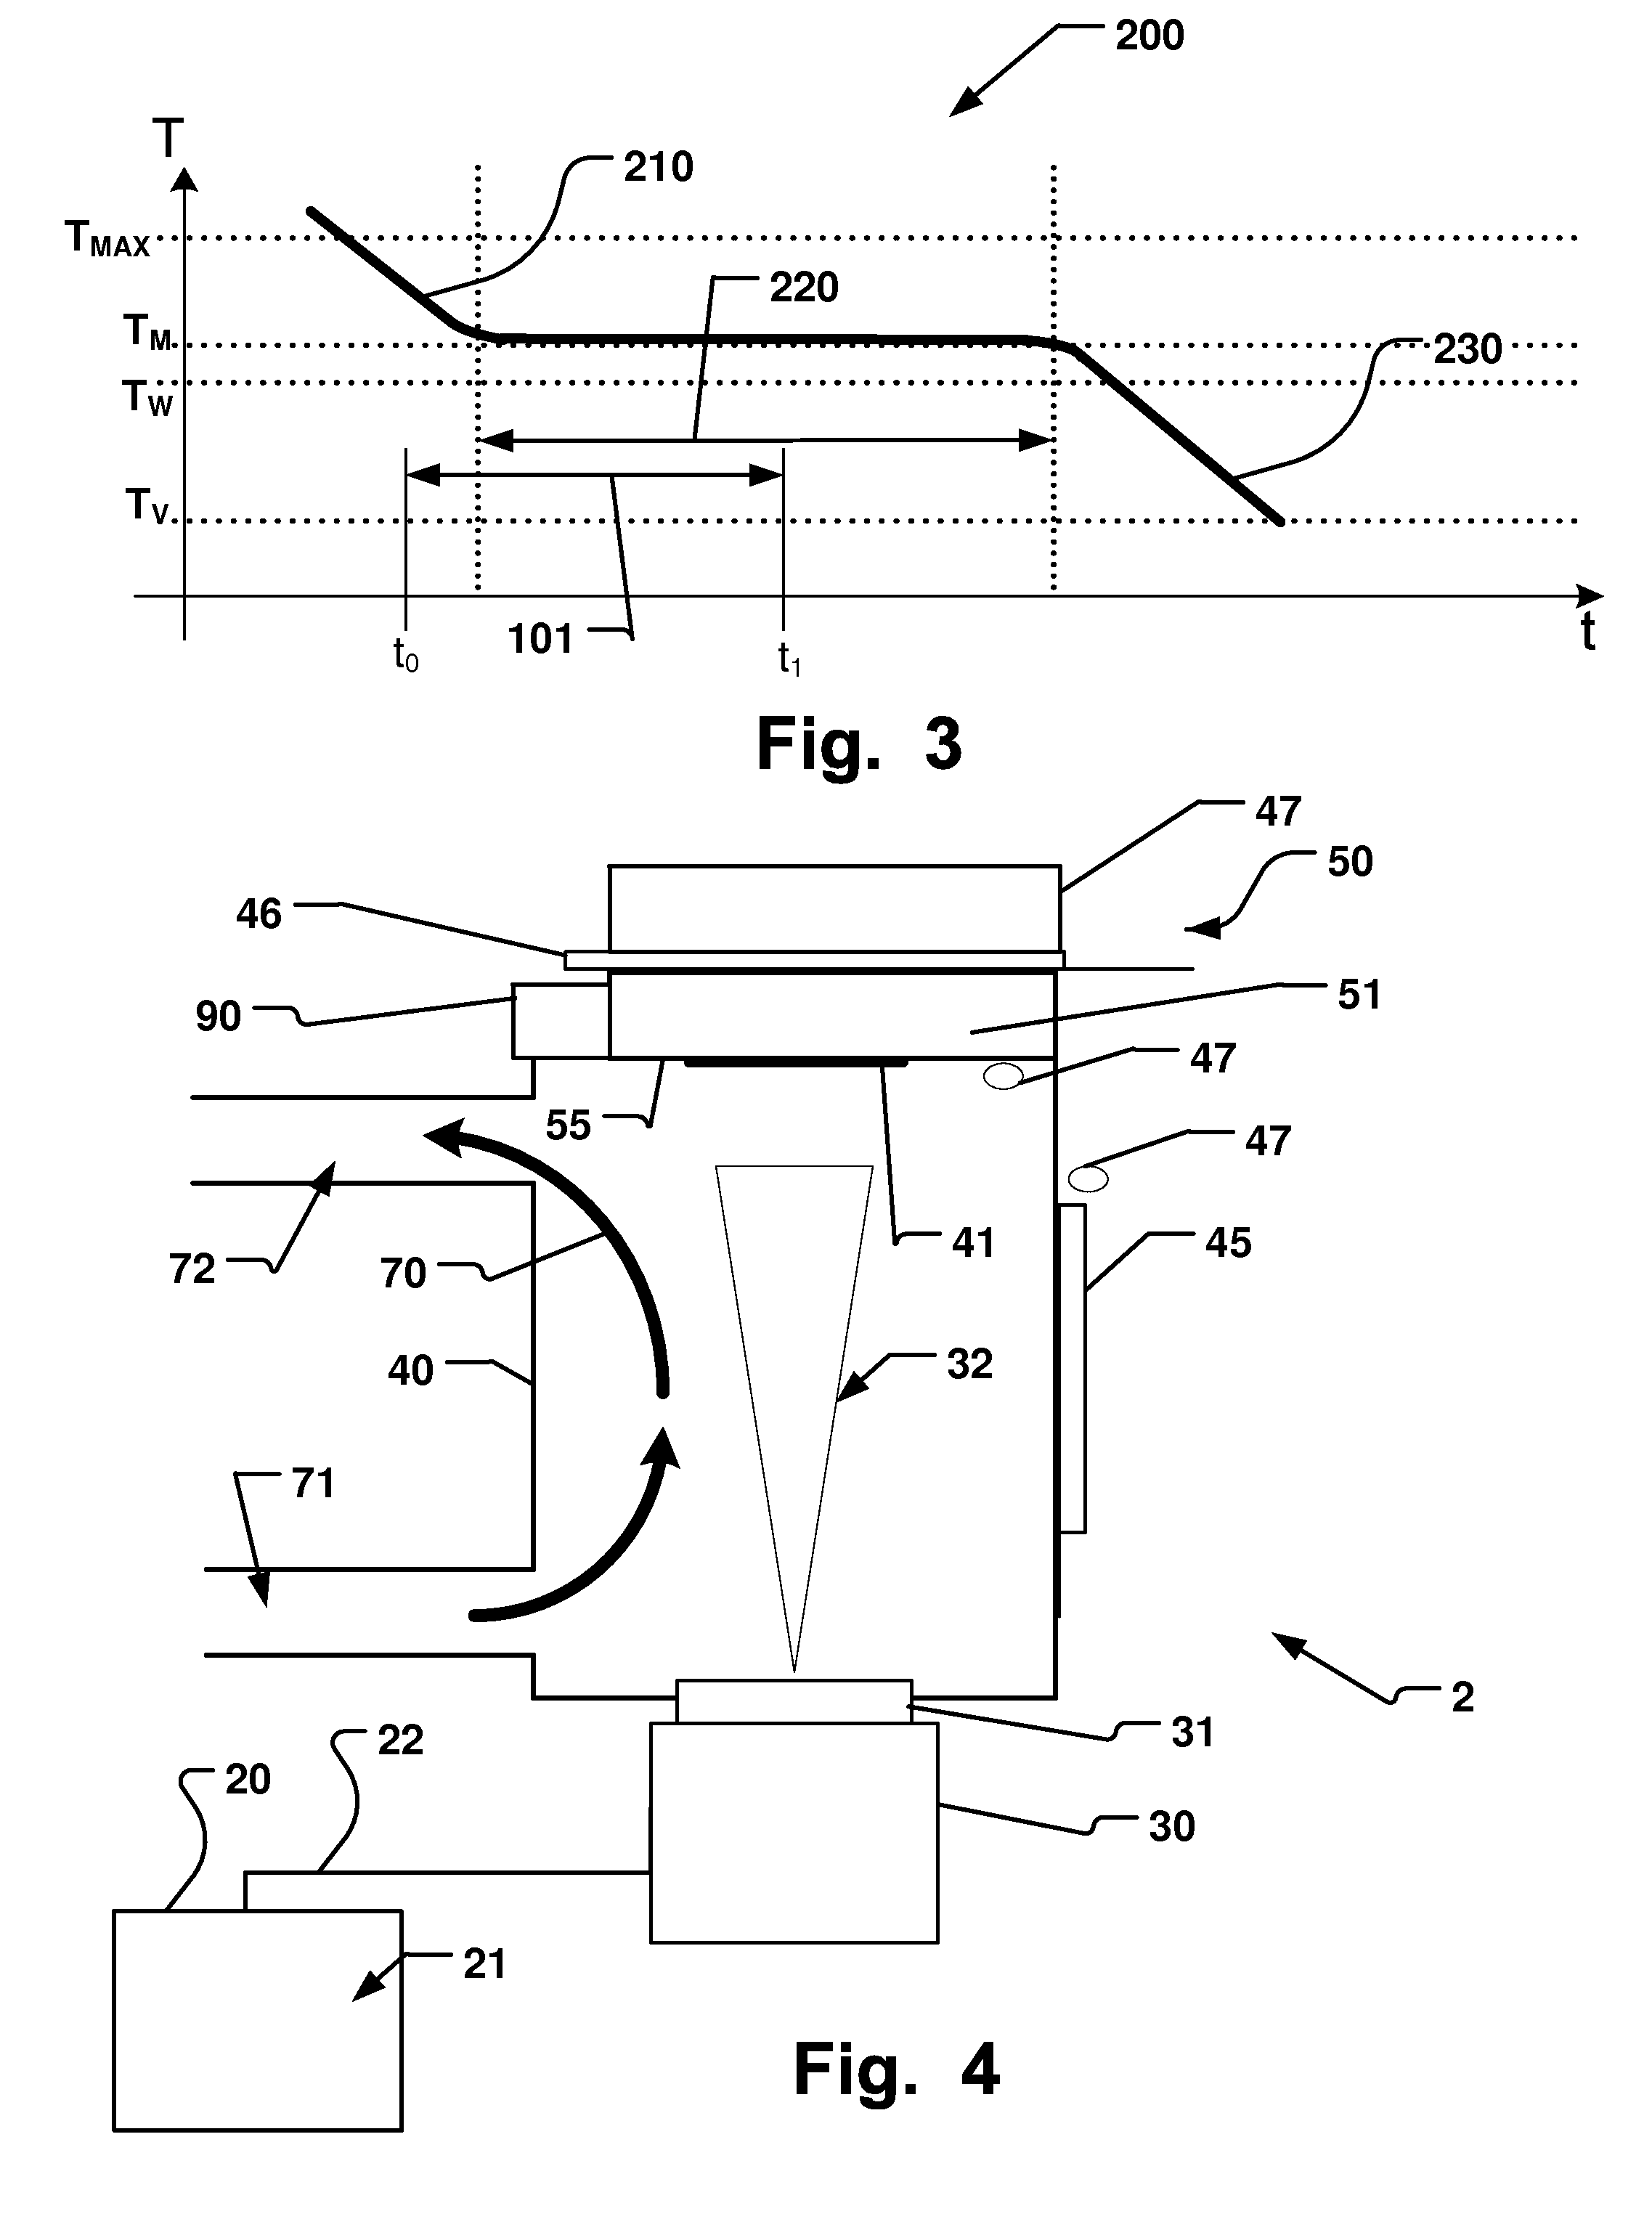 Anesthetic vaporizer for a breathing apparatus and method for operation thereof to vaporize a liquid anesthetic agent